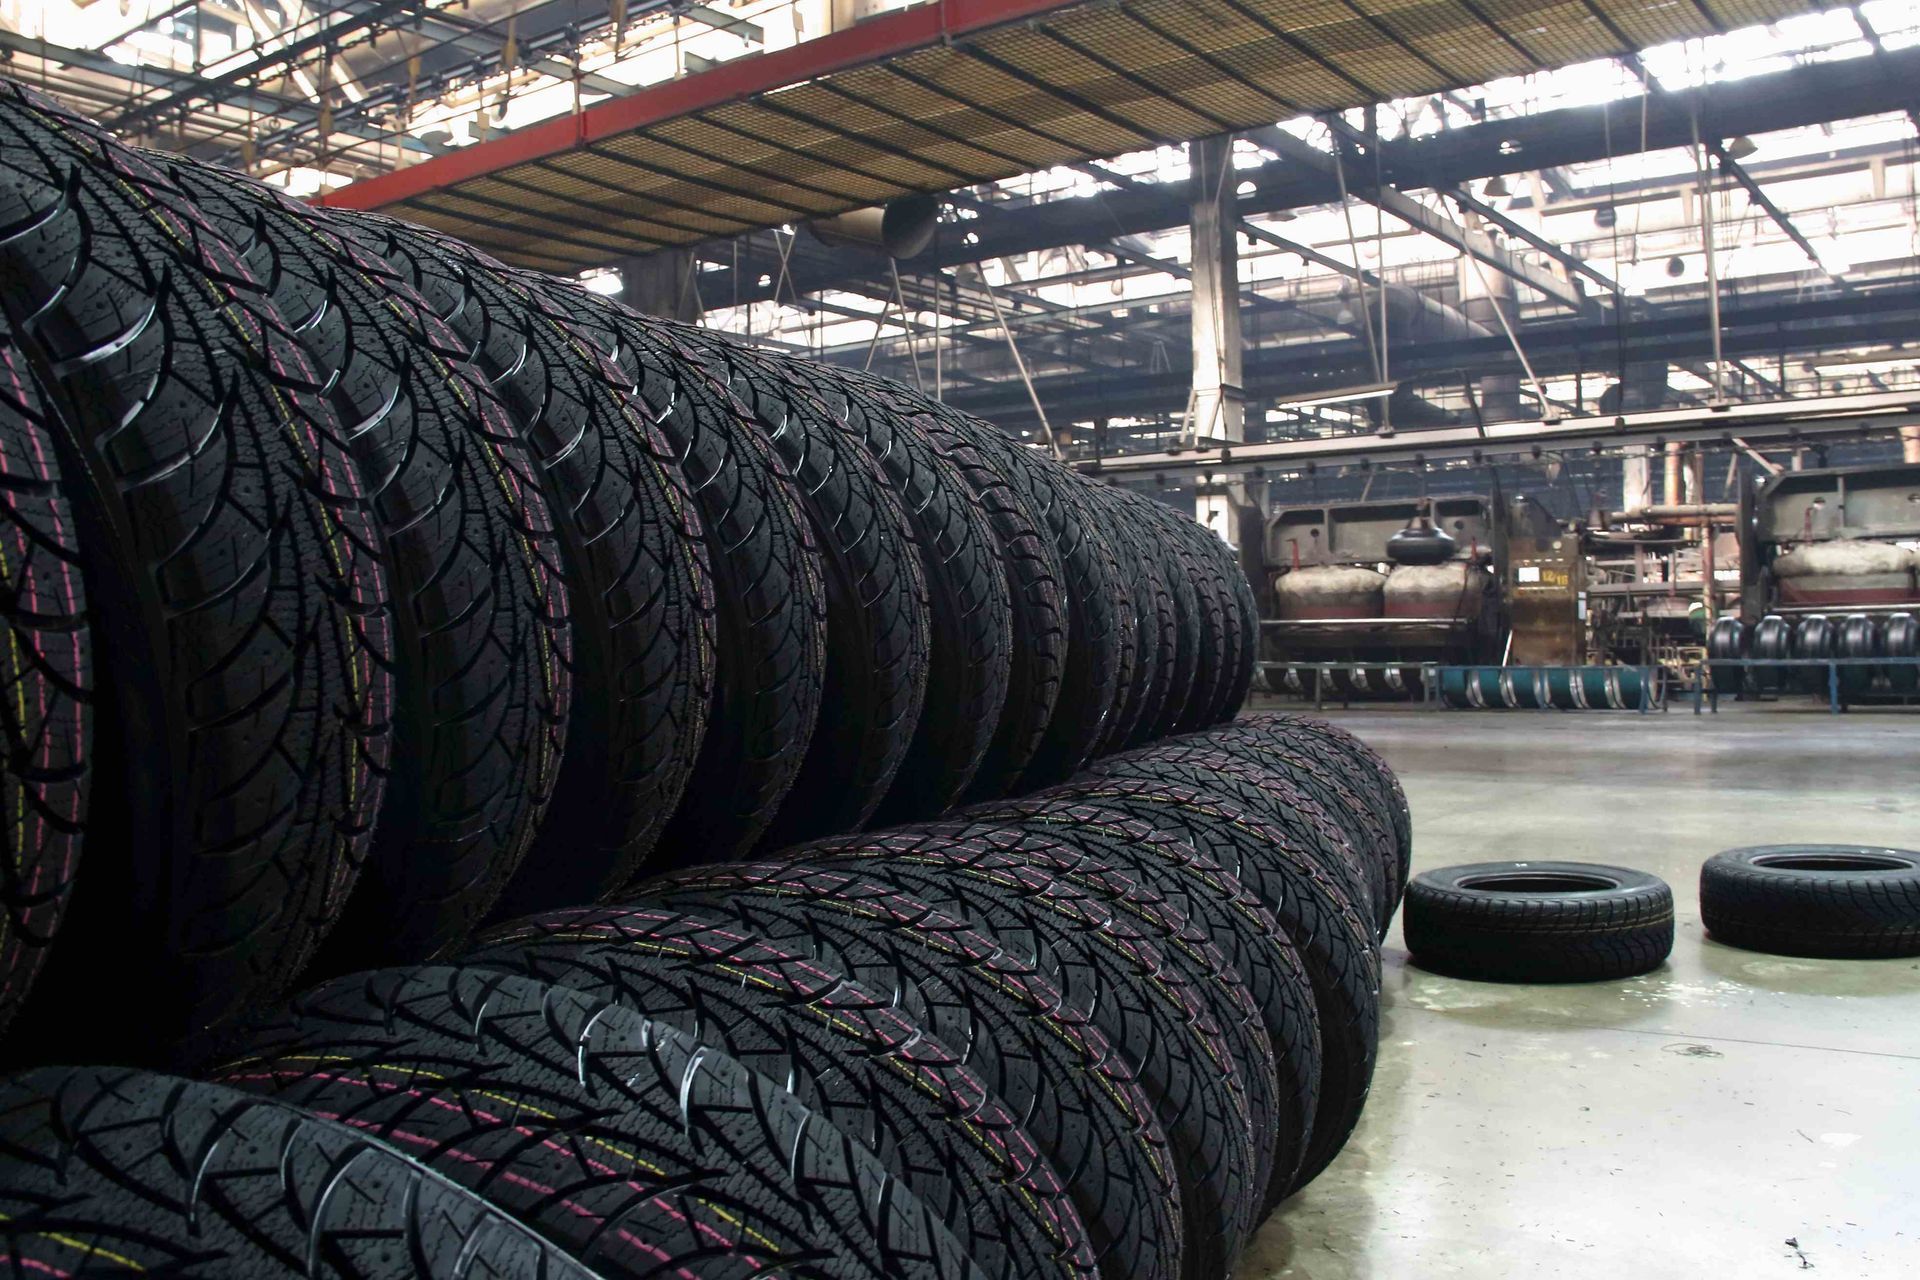 A portrait of tires in a commercial tire factory  